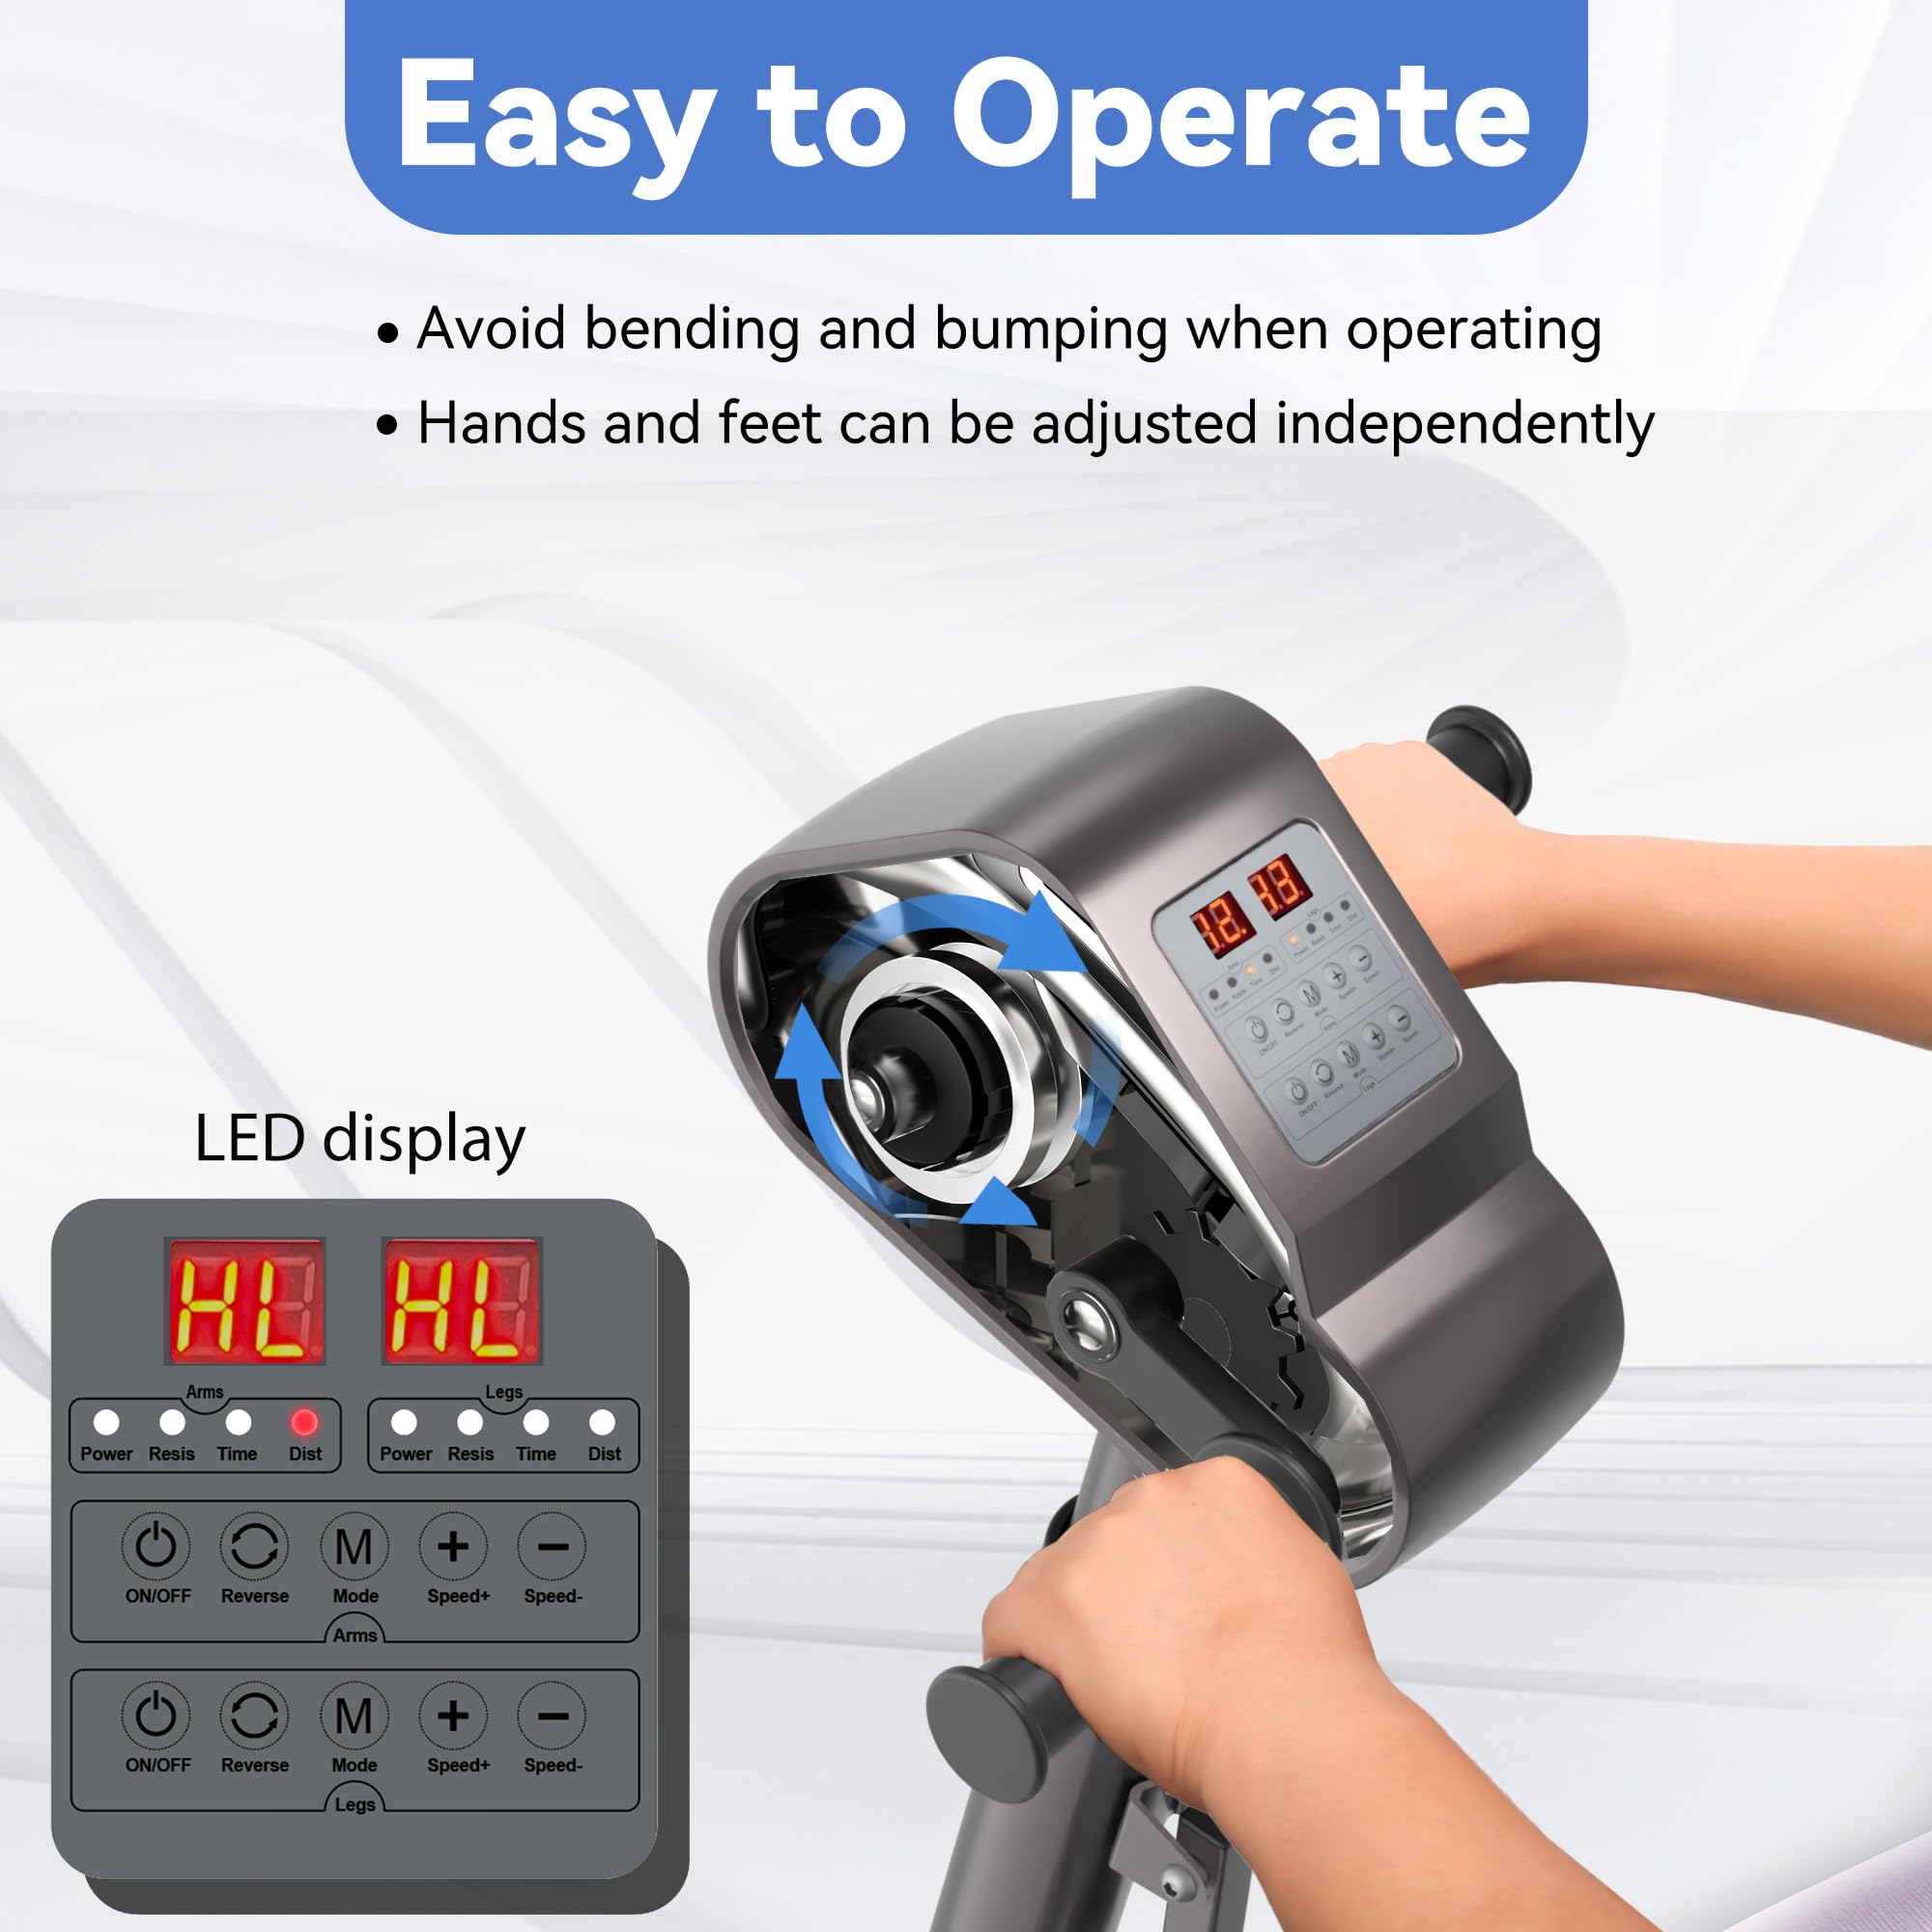 HNLIY Motorized Pedal Exerciser Leg Arm Workout Knee Physical Therapy Assisted Rehabilitation Electric Exercise Bike Home Recover Fitness Equipment Suitable for Elderly